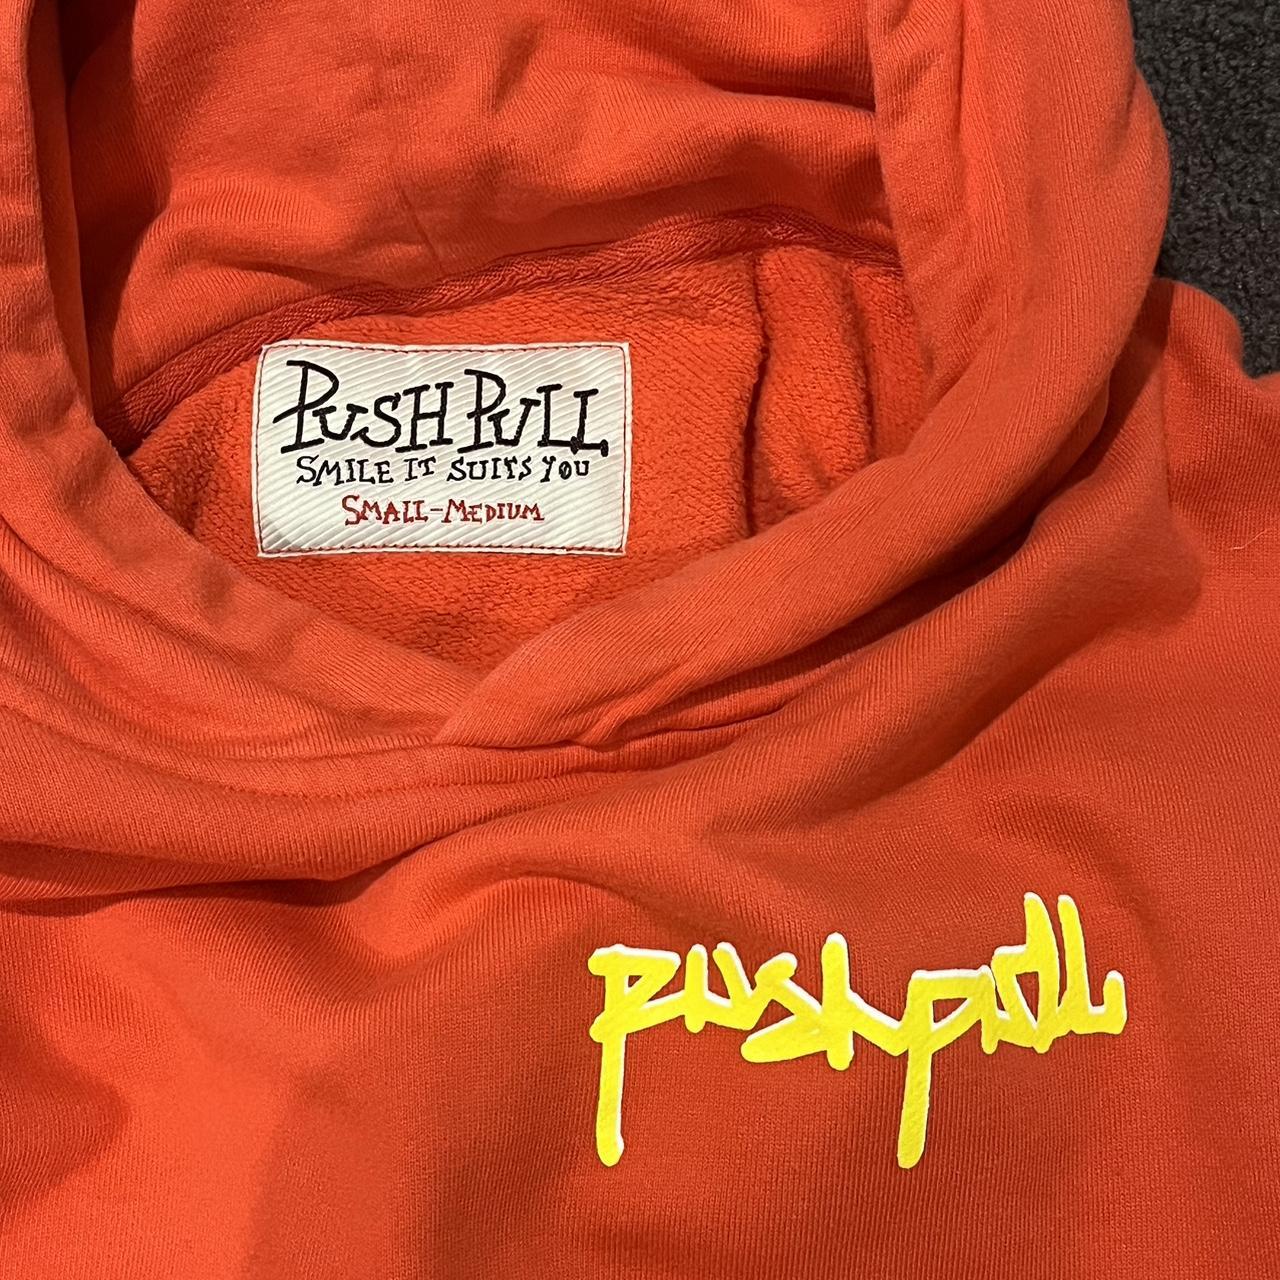 Push pull red hoodie - limited edition no longer... - Depop